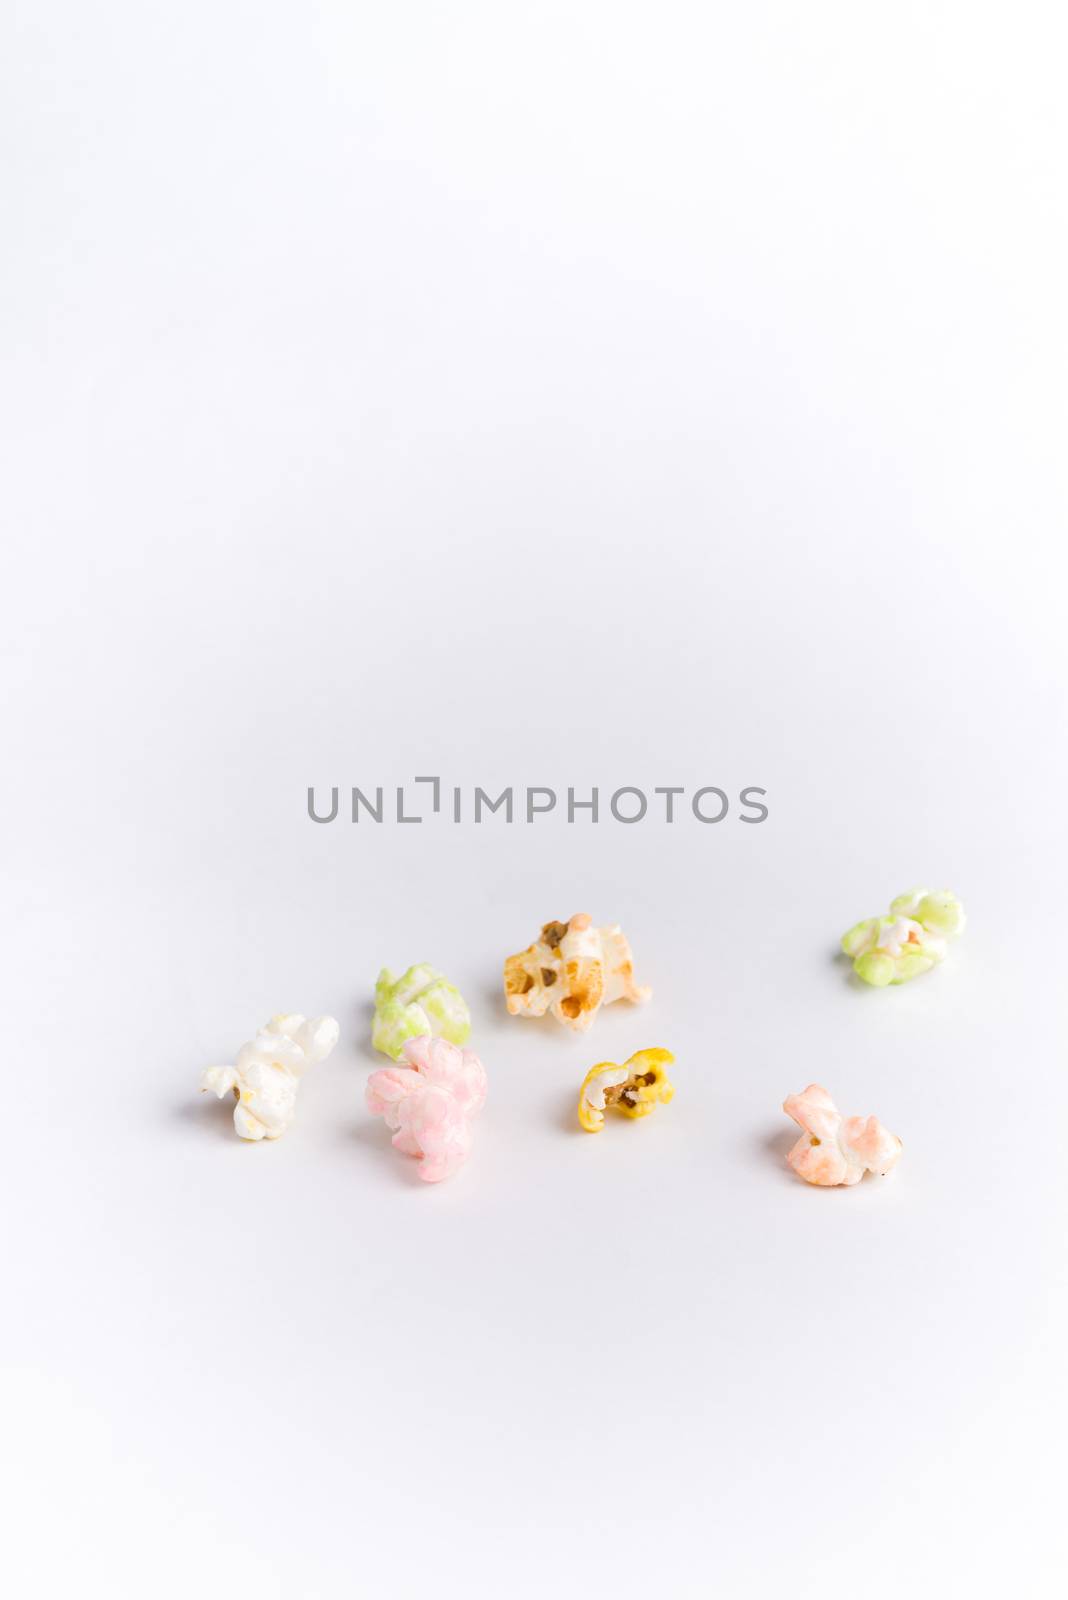 Colorful Popcorn by justtscott